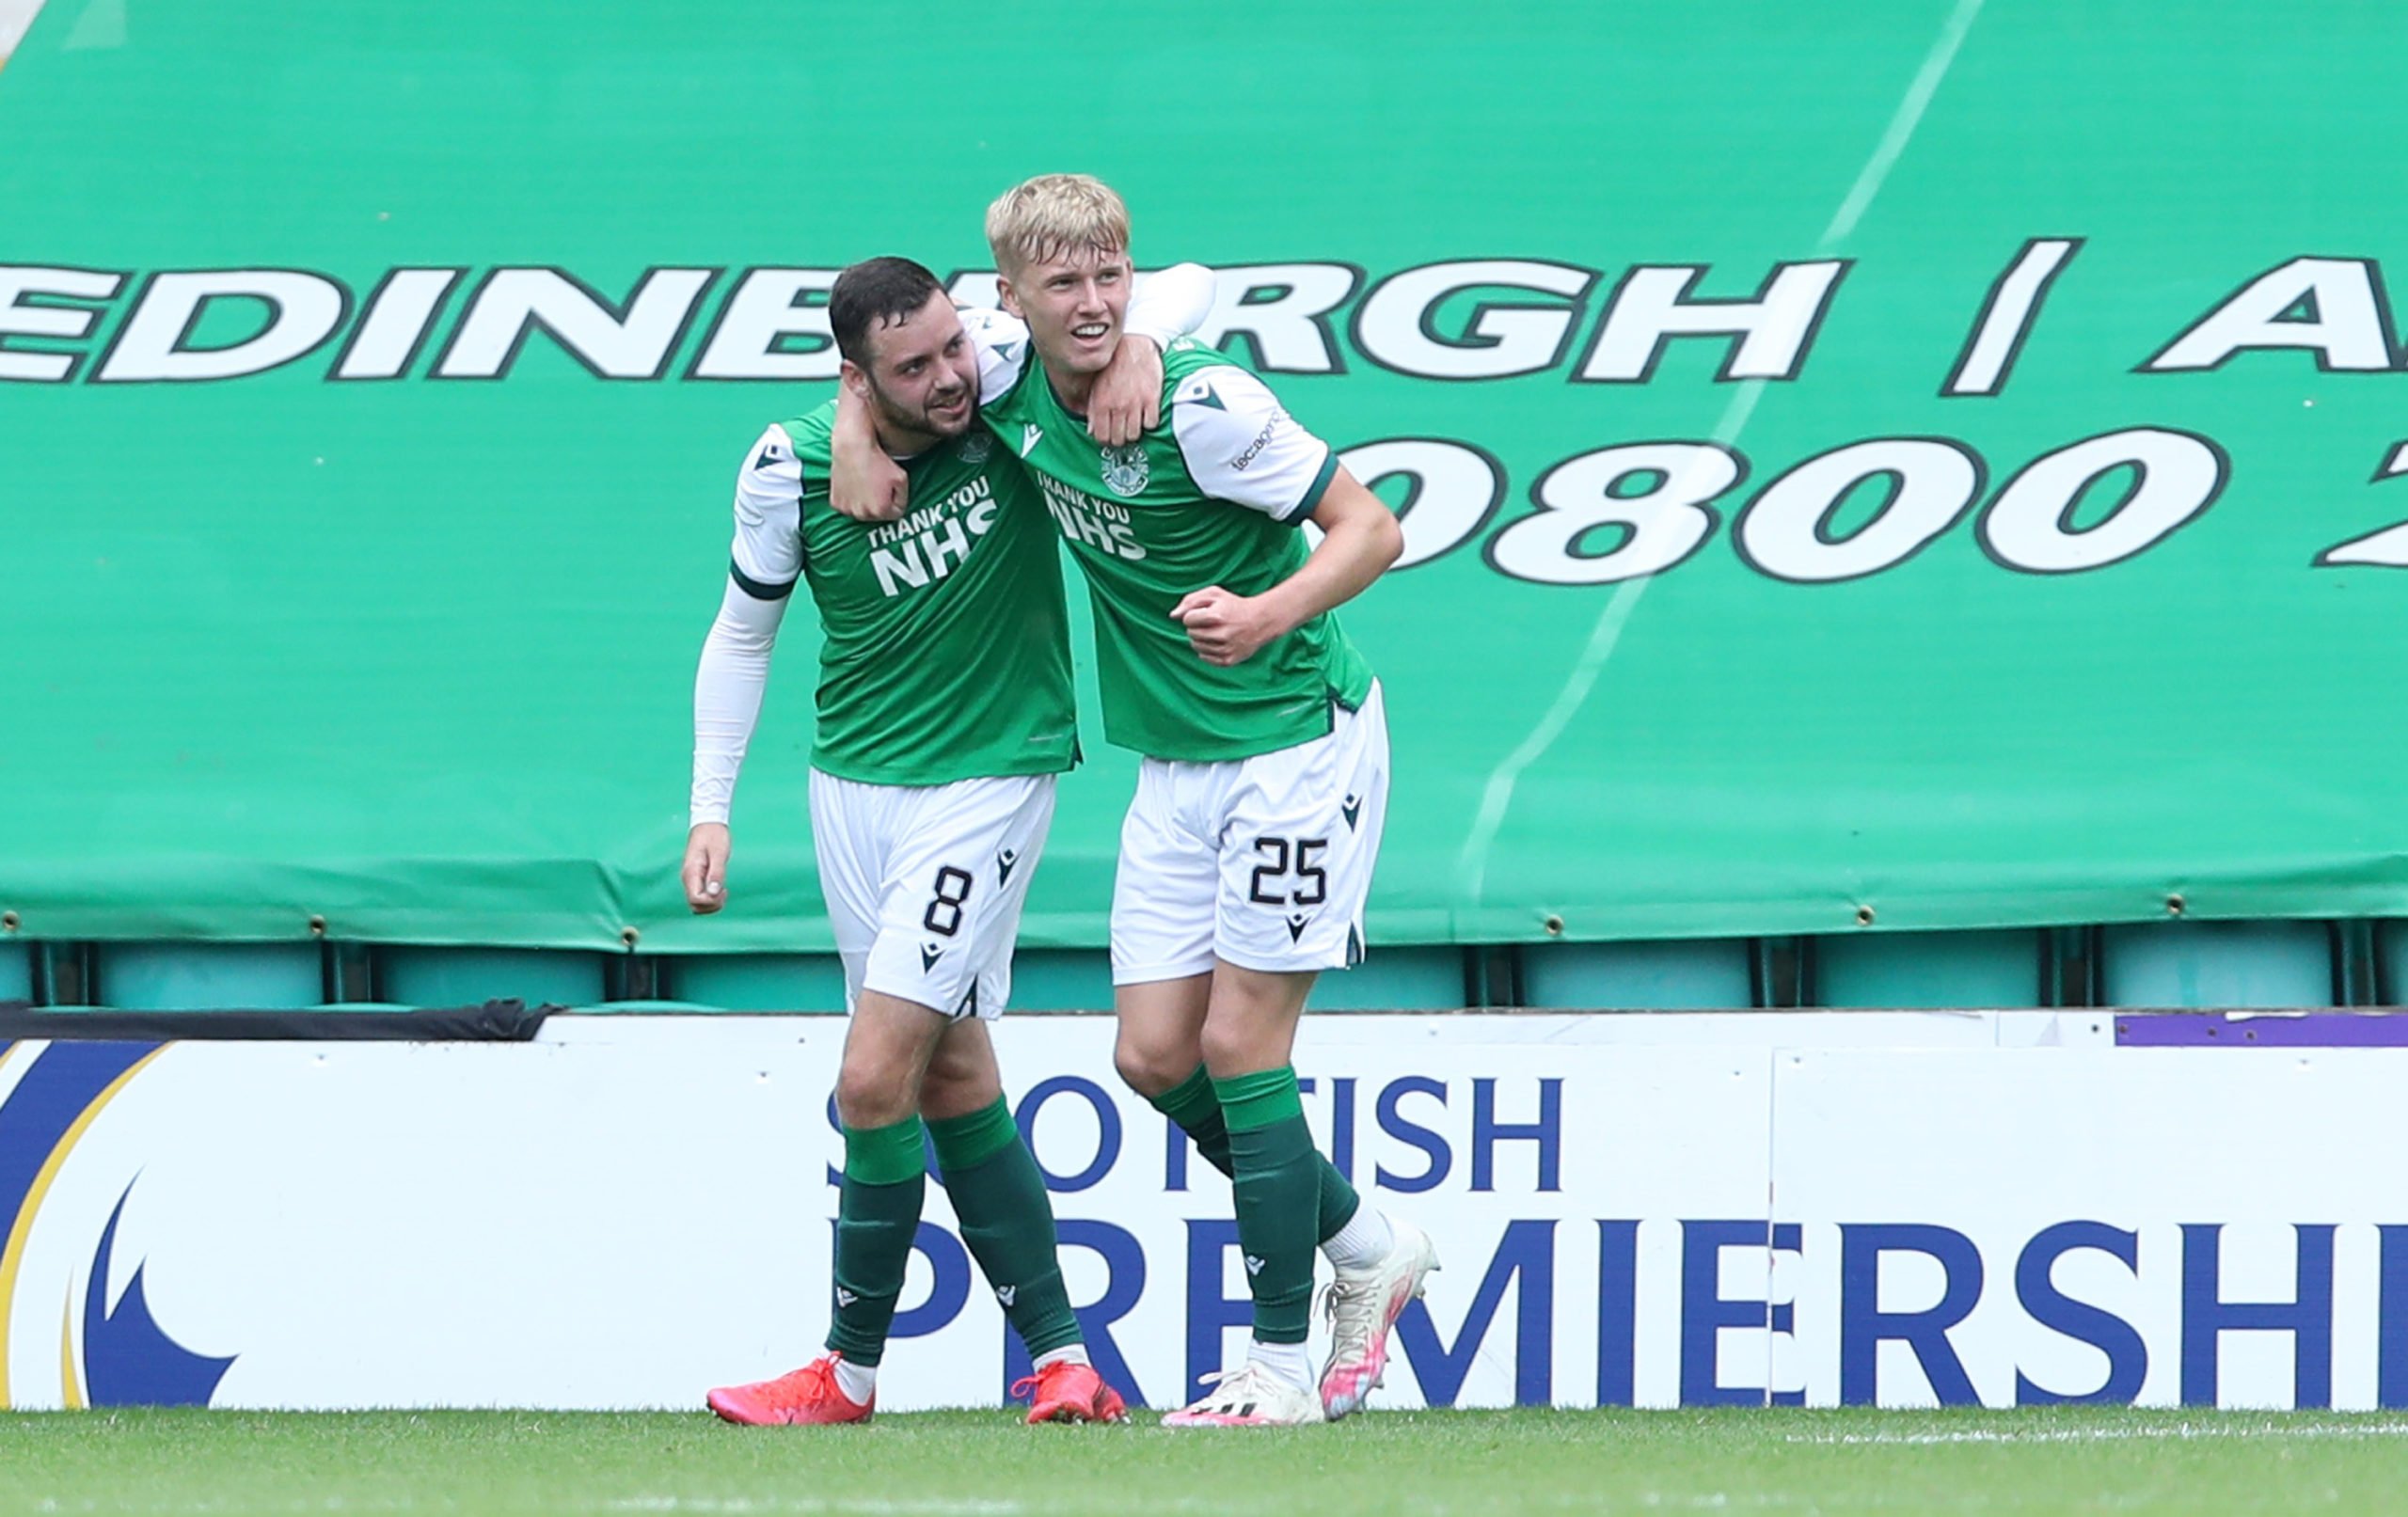 EDINBURGH, SCOTLAND - SEPTEMBER 20: Drey Wright of Hibernian FC celebrates with teammate Josh Doig after scoring his team's first goal during the Scottish Premiership match between Hibernian and Rangers at Easter Road on September 20, 2020 in Edinburgh, Scotland. (Photo by Ian MacNicol/Getty Images)